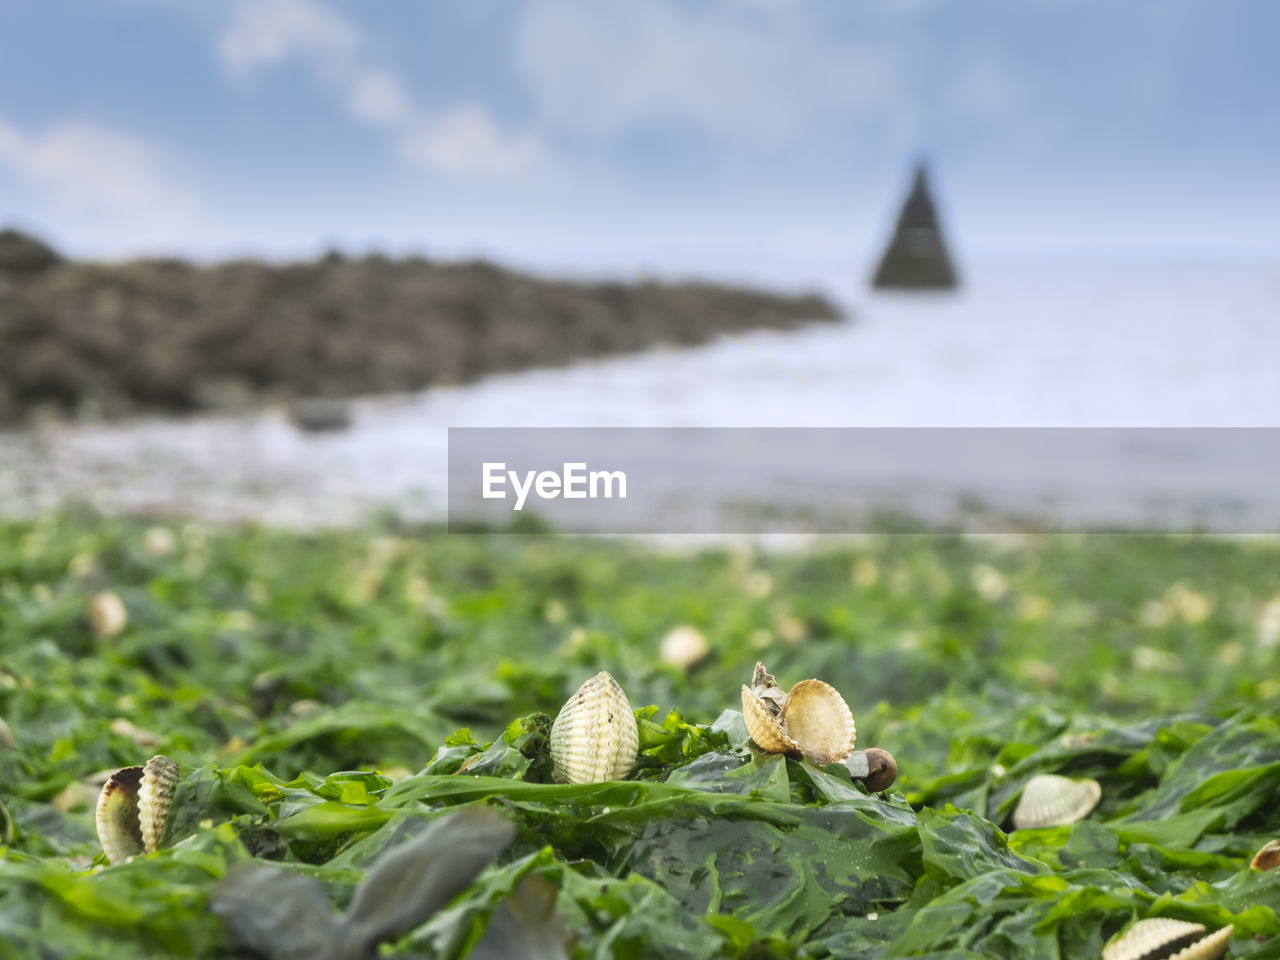 Mussel shells on alluvial seaweed in front of a blurred background with a view of a stone wall.